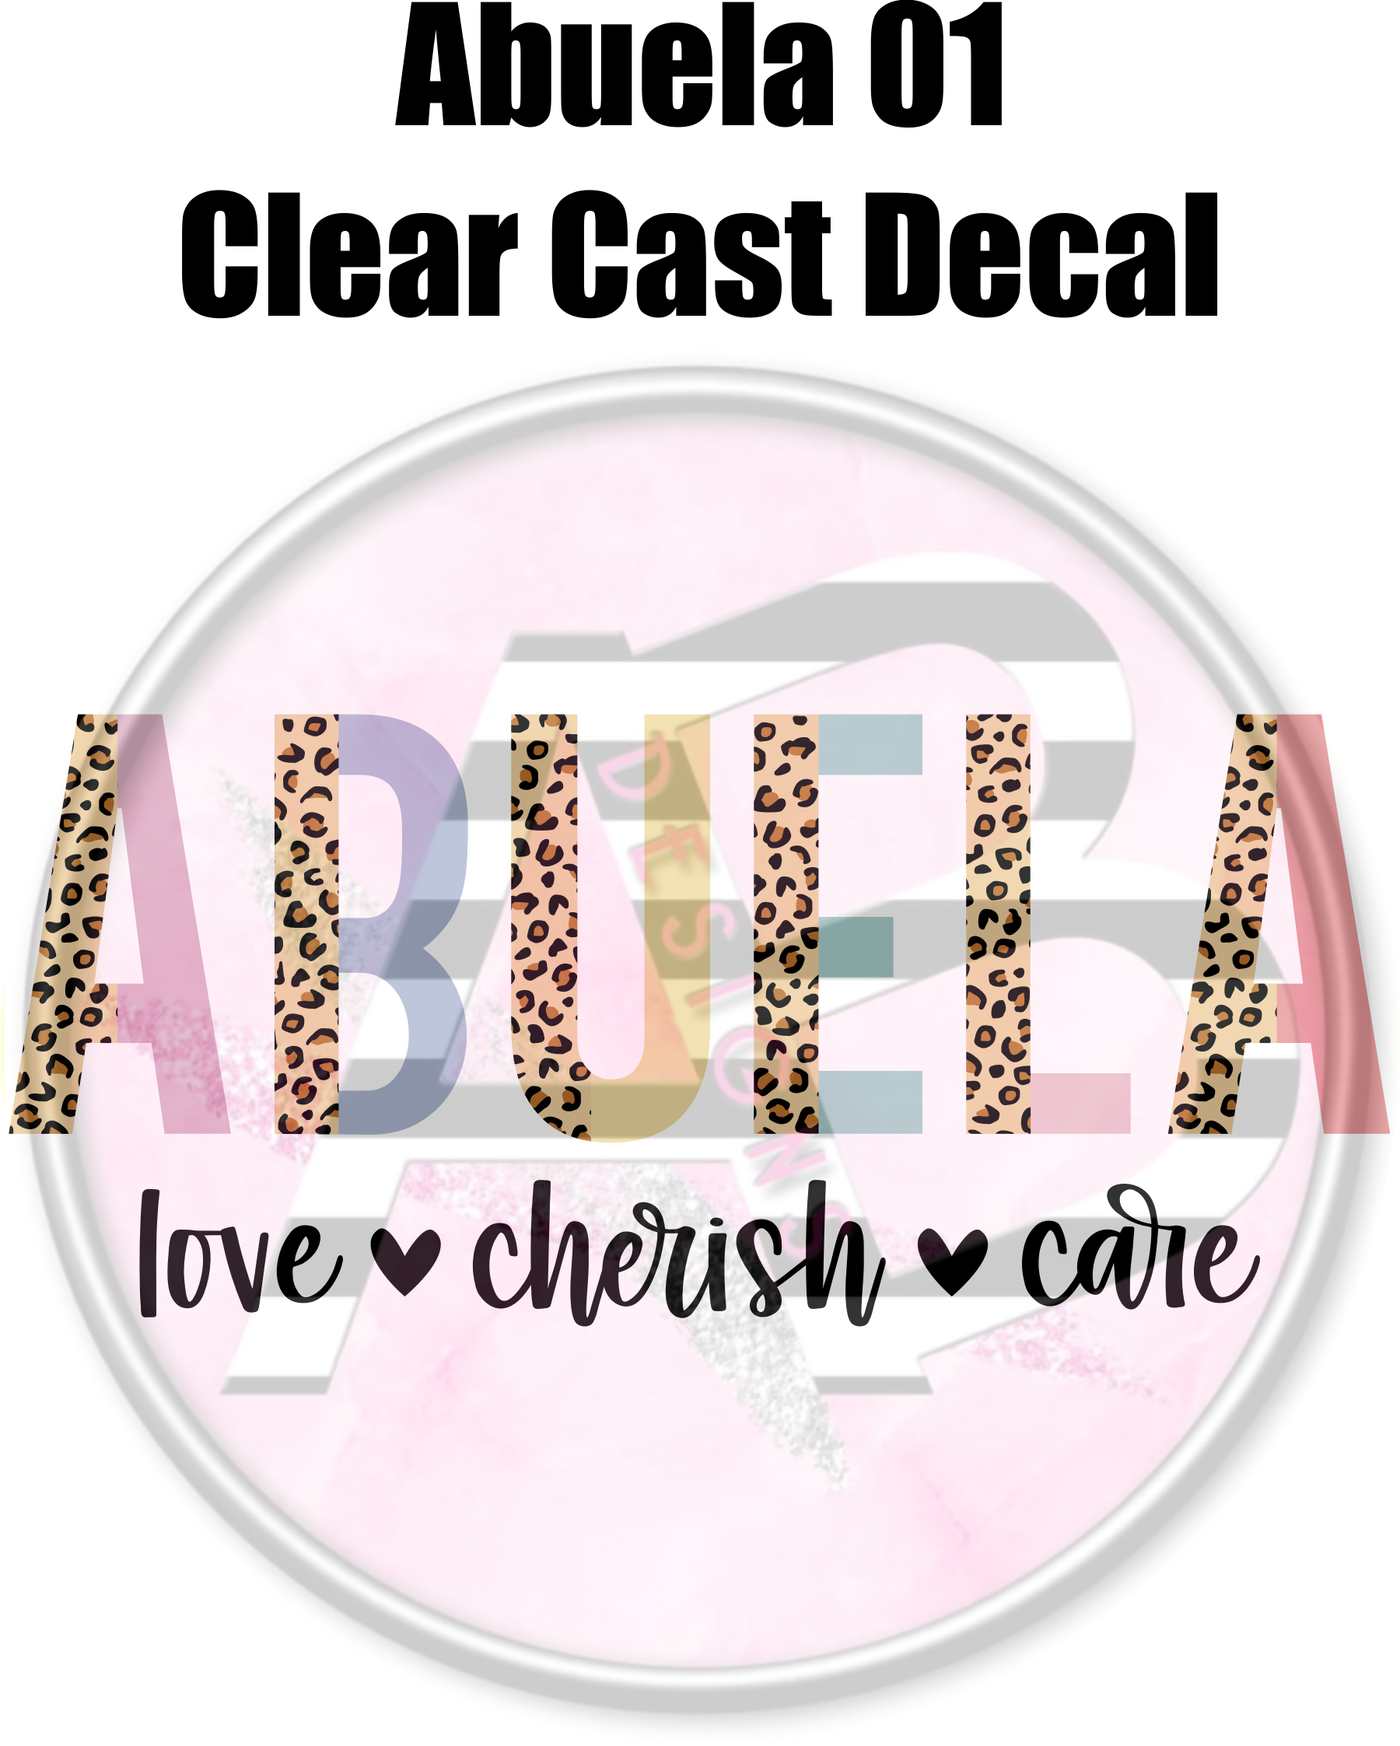 Abuela 01 - Clear Cast Decal